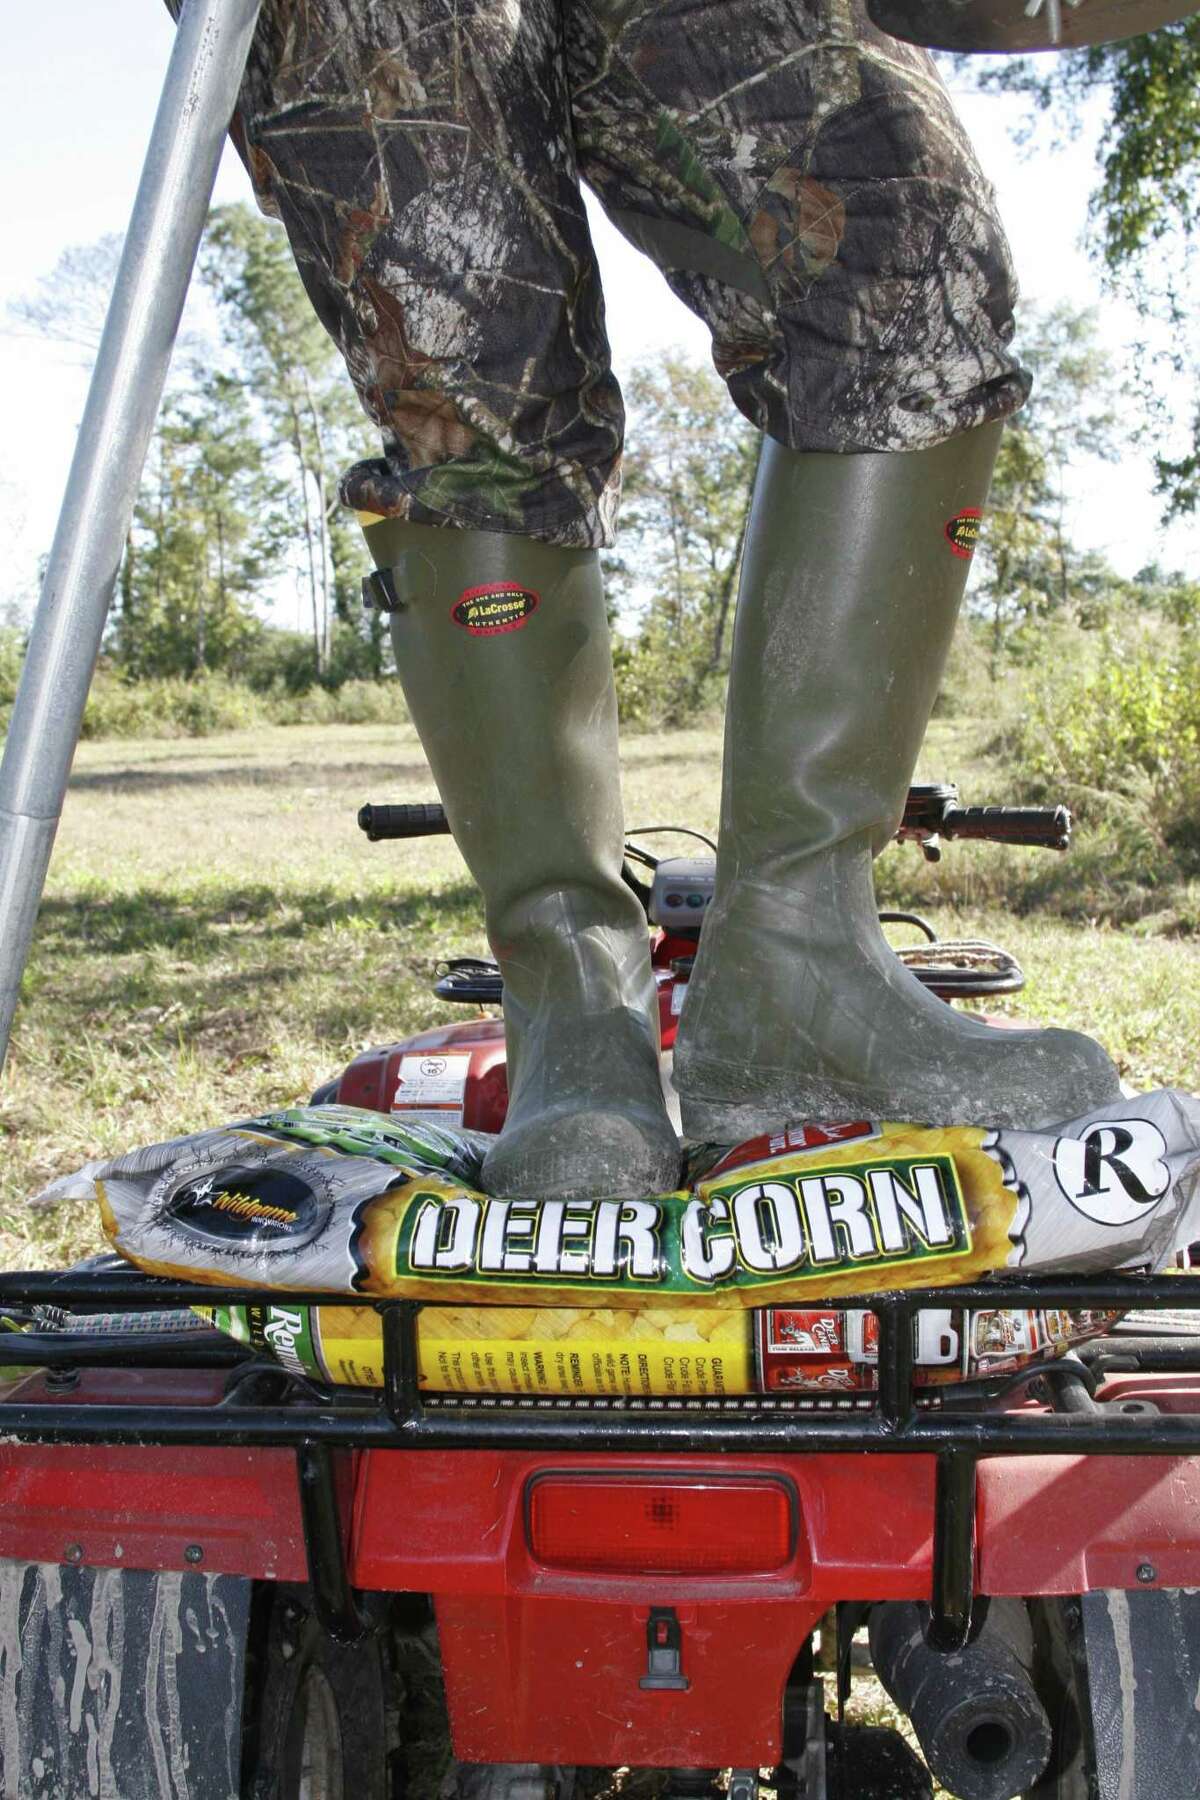 Durability, light weight, solid ankle-fit and modest price of LaCrosse's Grange and Burly model rubber boots, introduced more than half century ago, have made them longtime favorites of Texas hunters who spend time in wet, muddy places